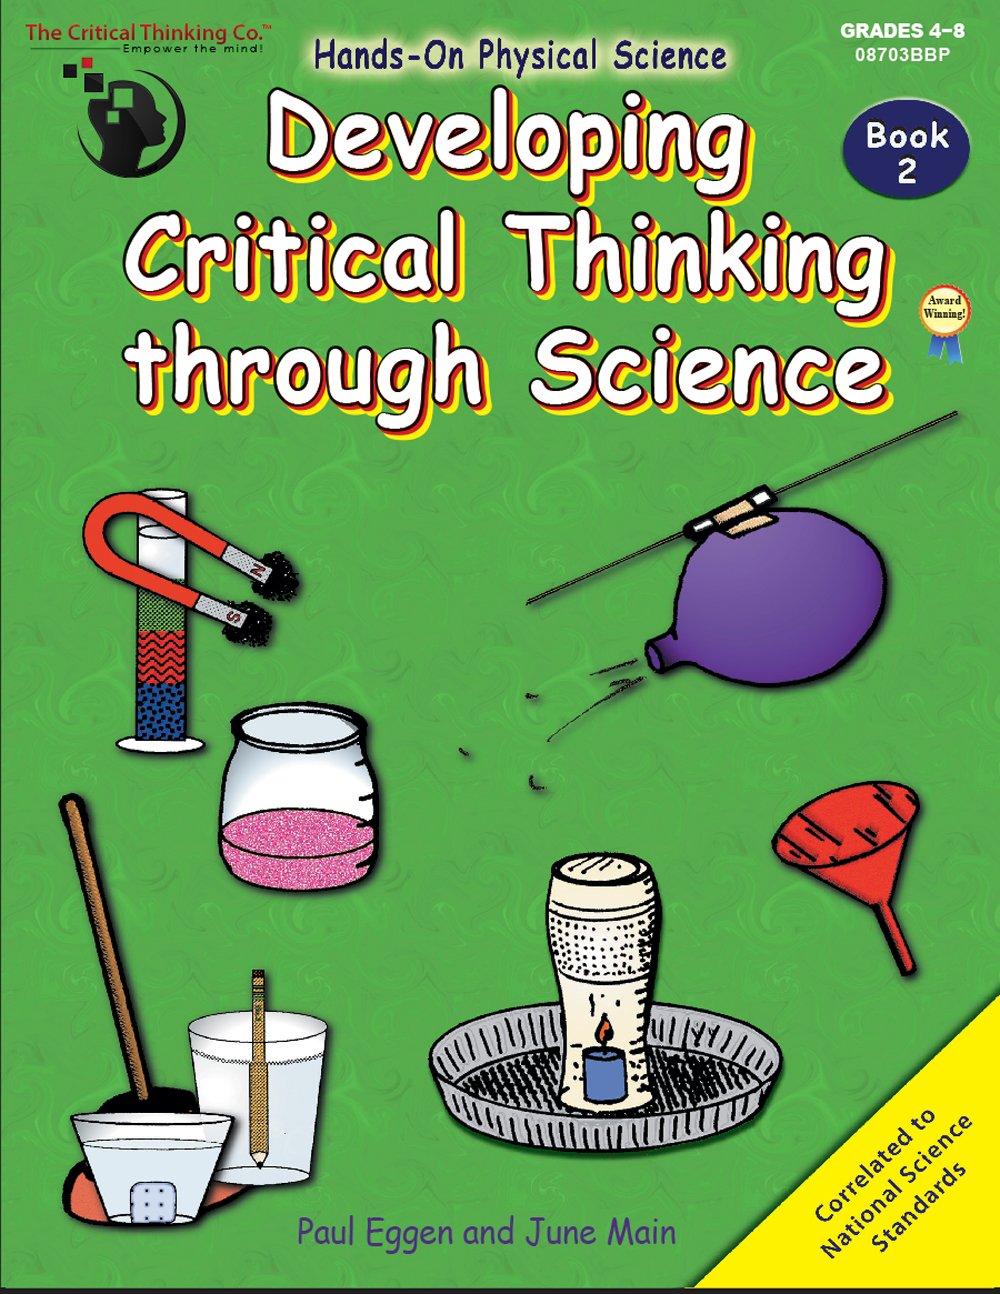 Developing Critical Thinking Through Science book 2